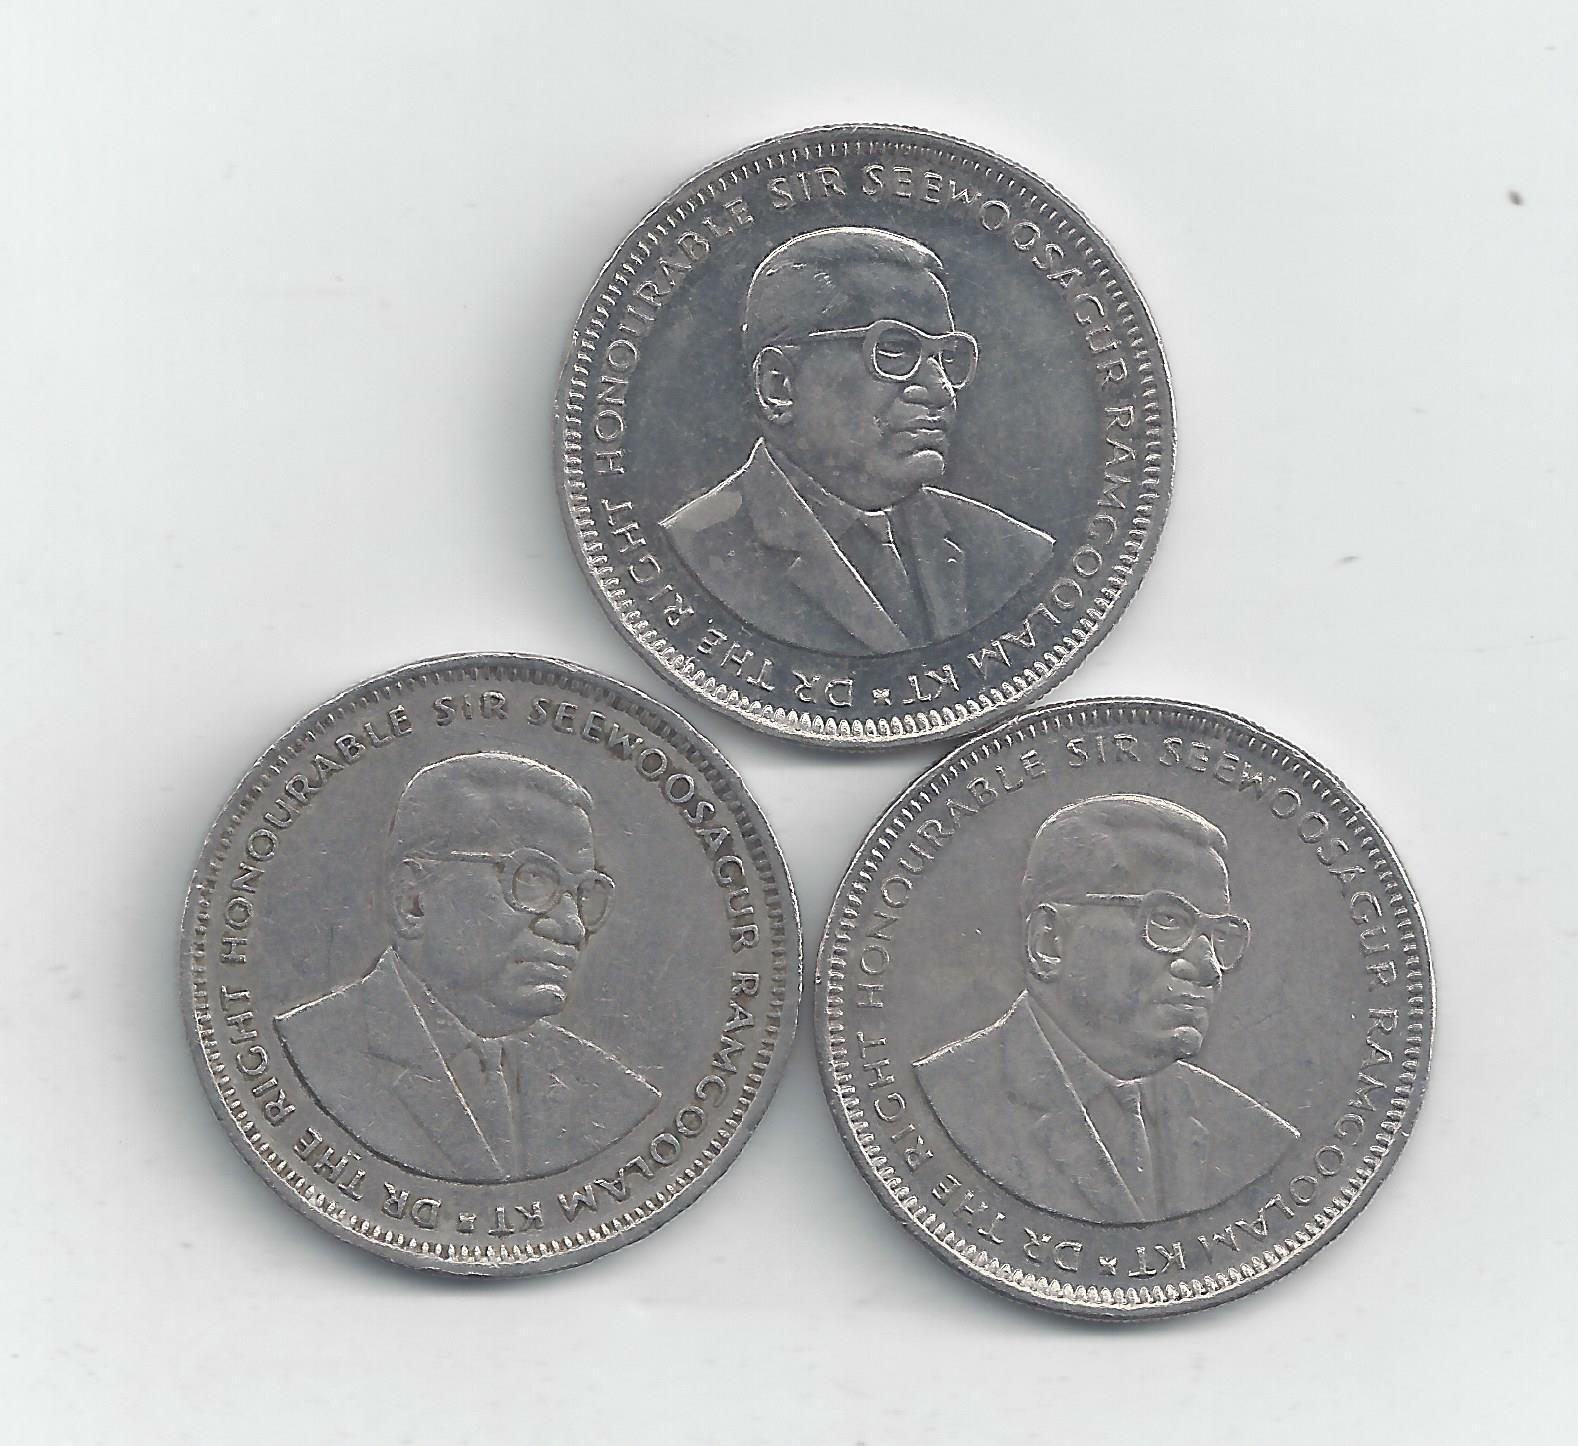 3 Different 1 Rupee Coins From Mauritius (1991, 2002 & 2004)